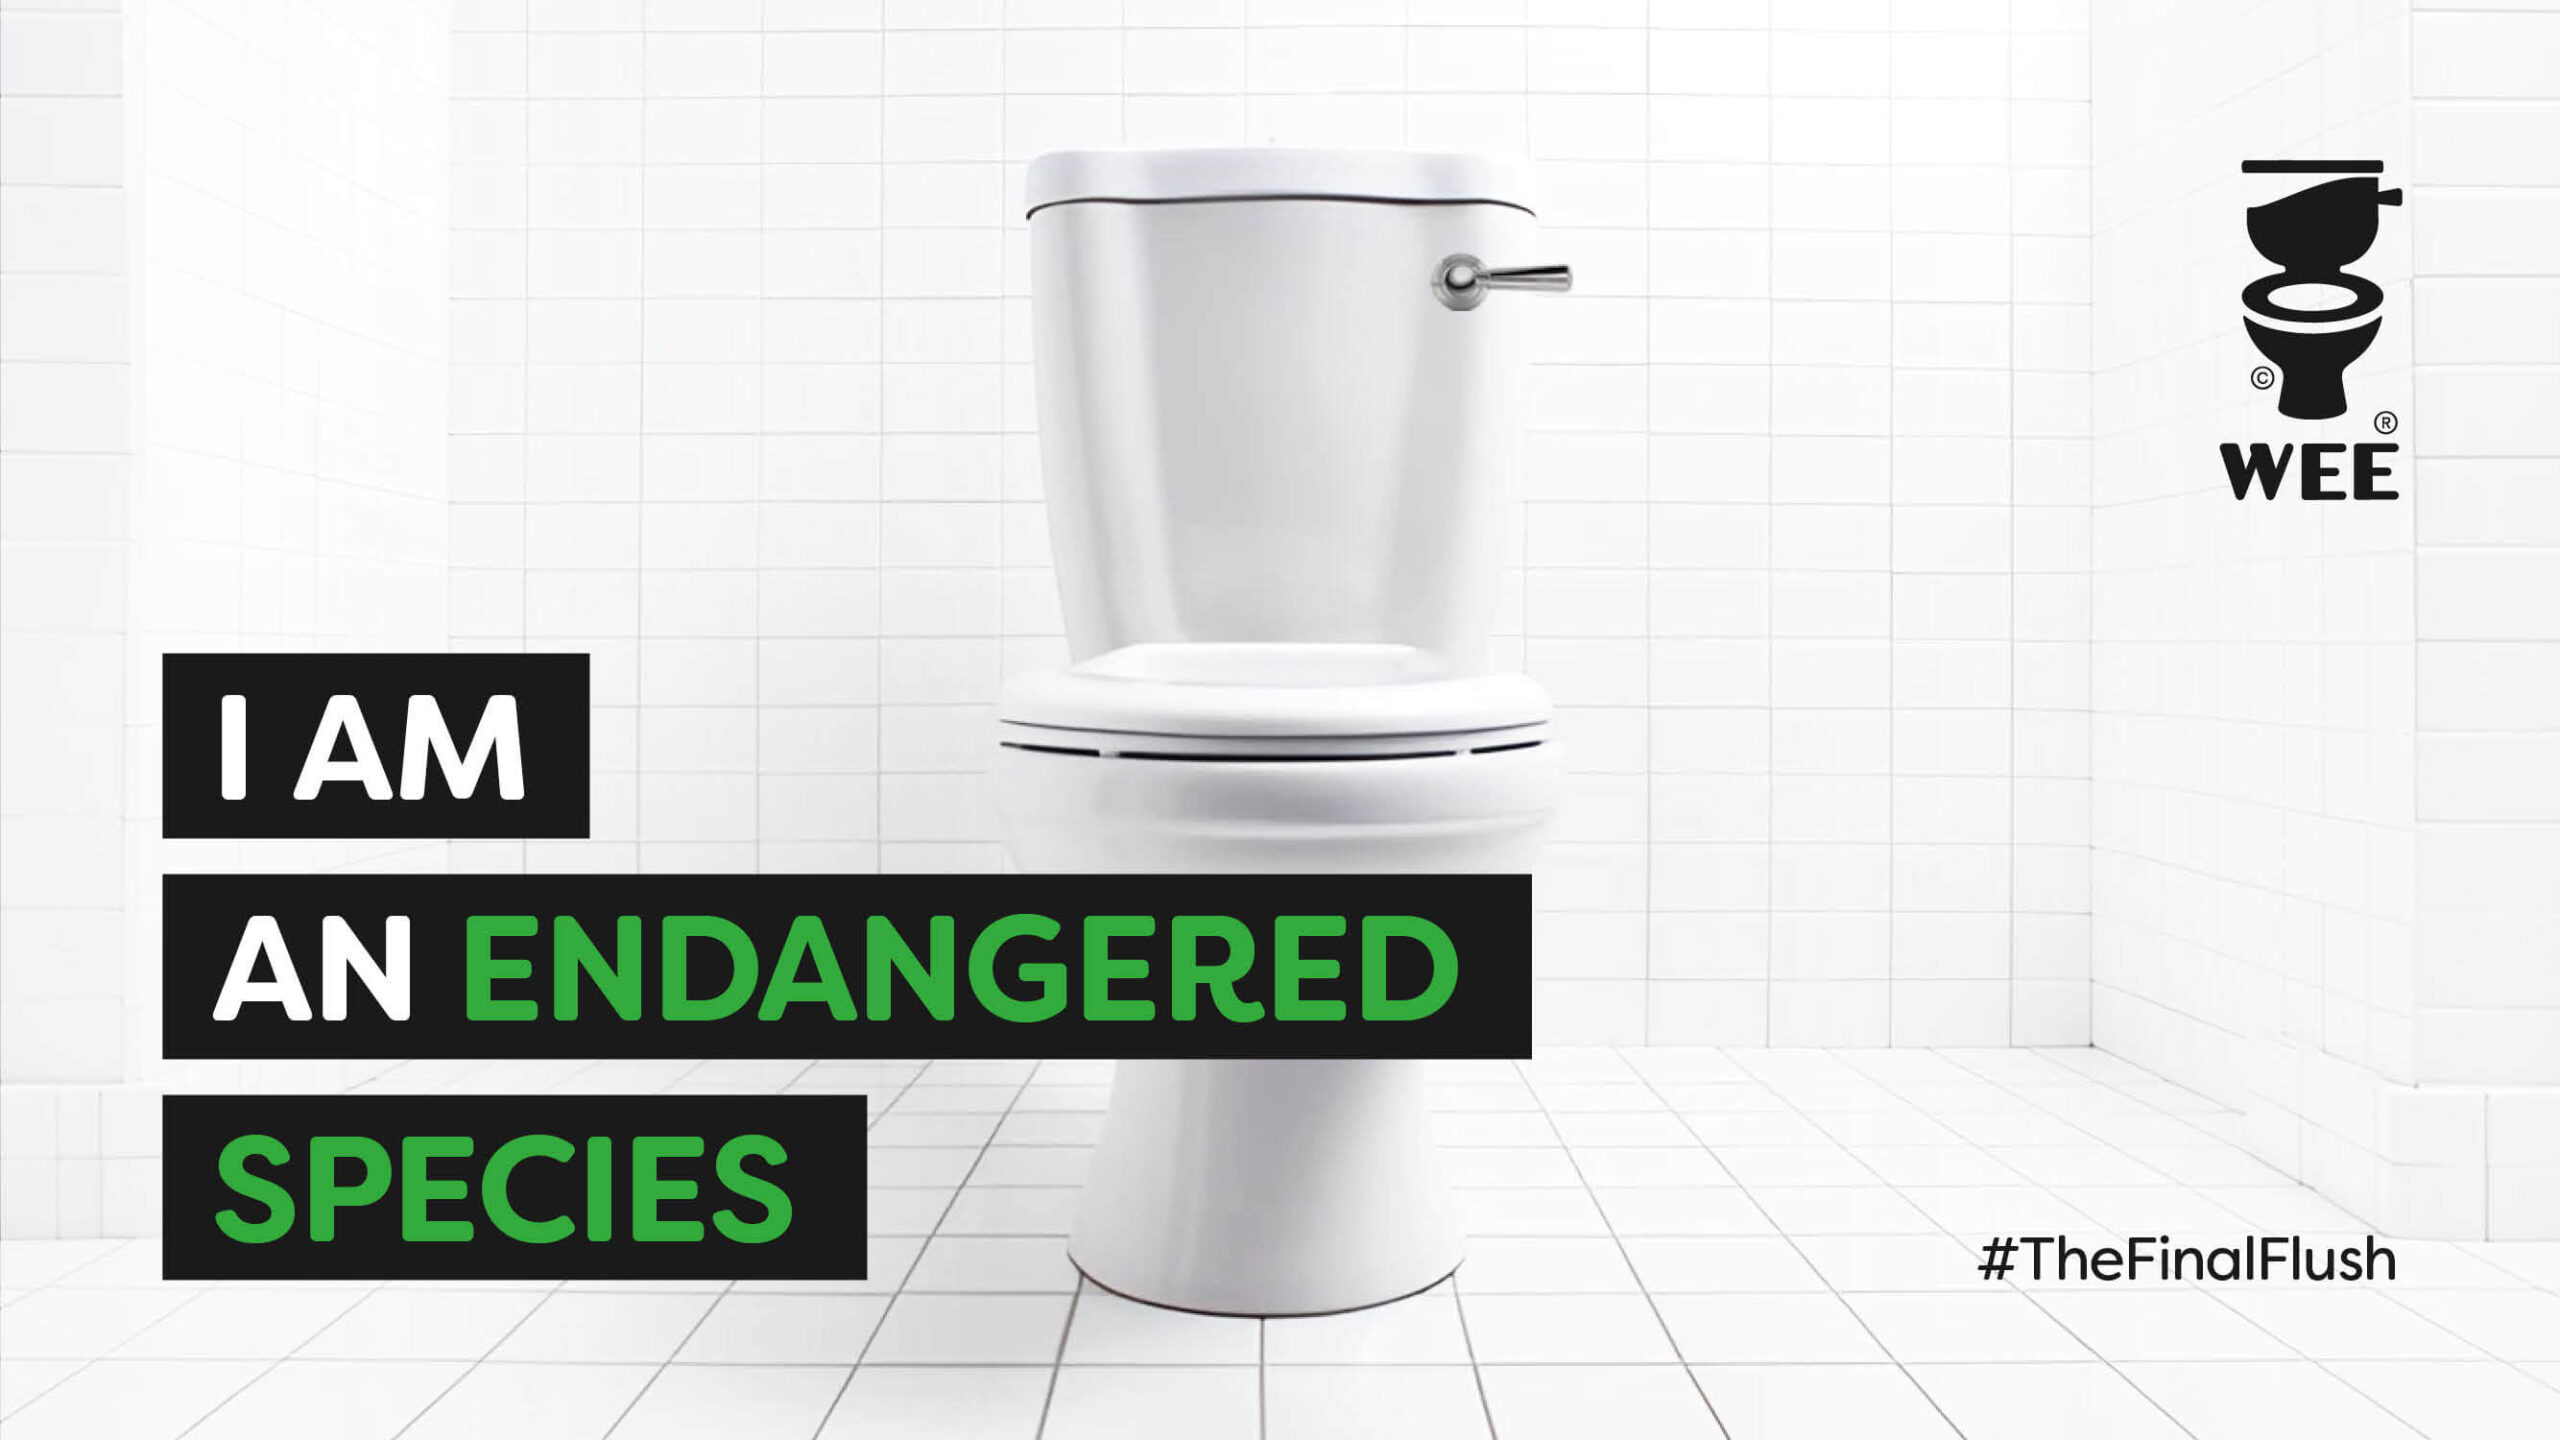 Going Beyond the First Idea: Endangered Toilets